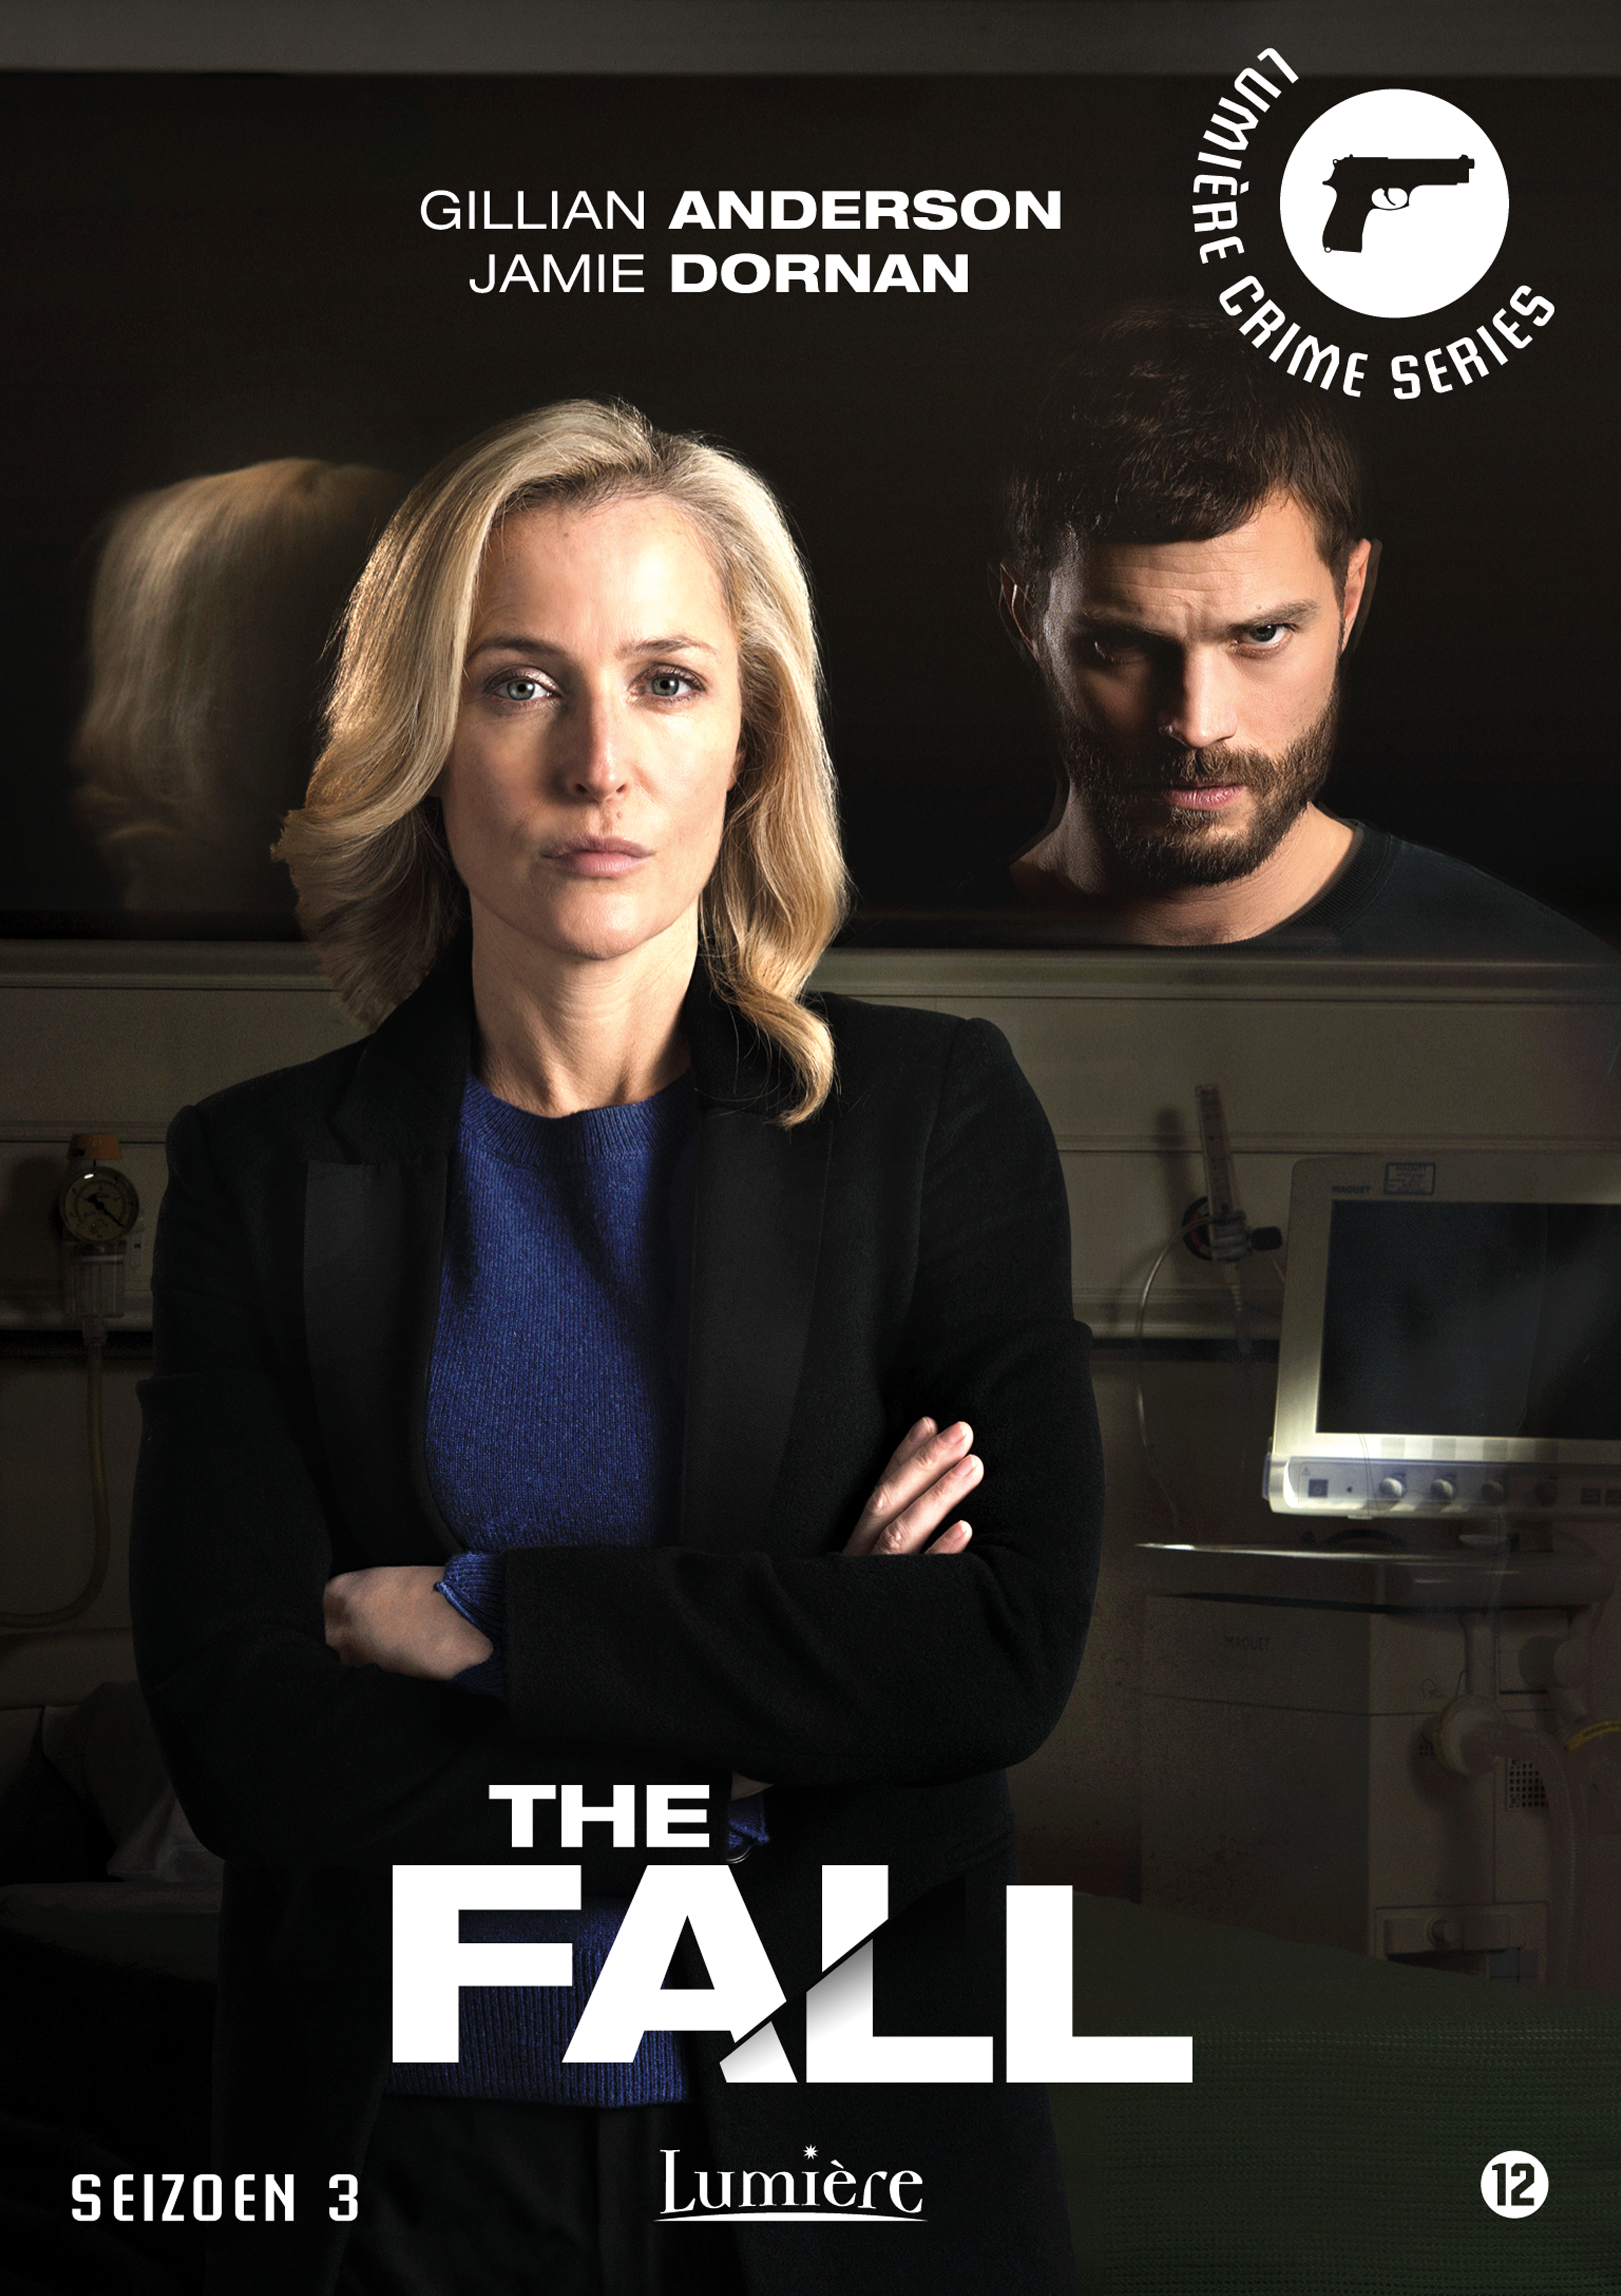 THE FALL 3